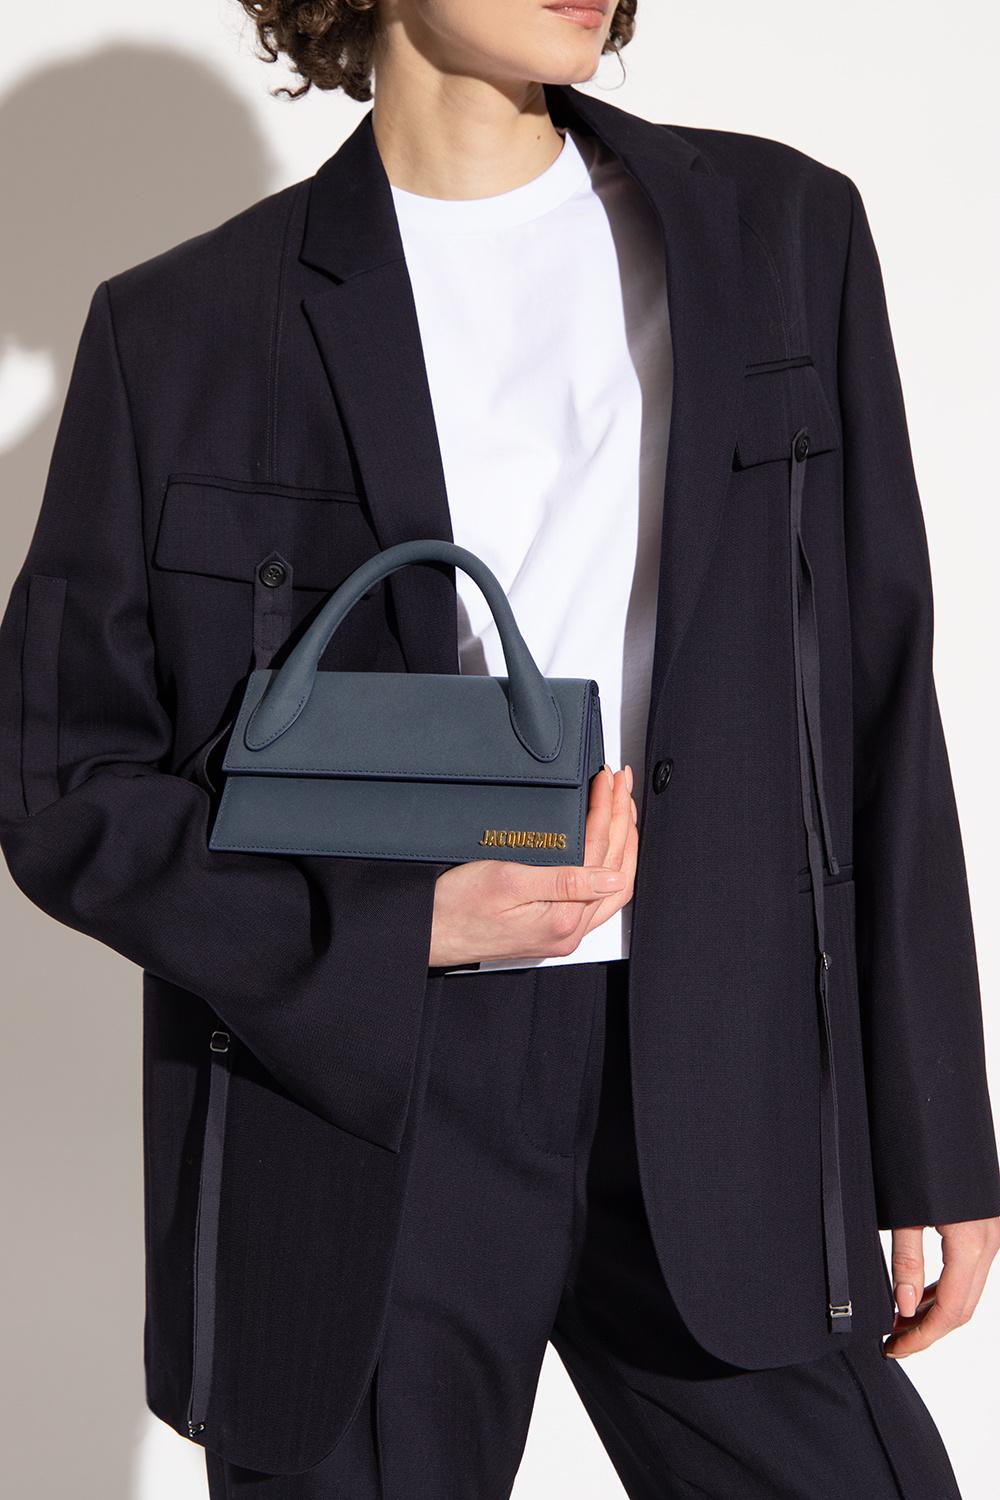 Jacquemus Le Chiquito Long Bag in Grey